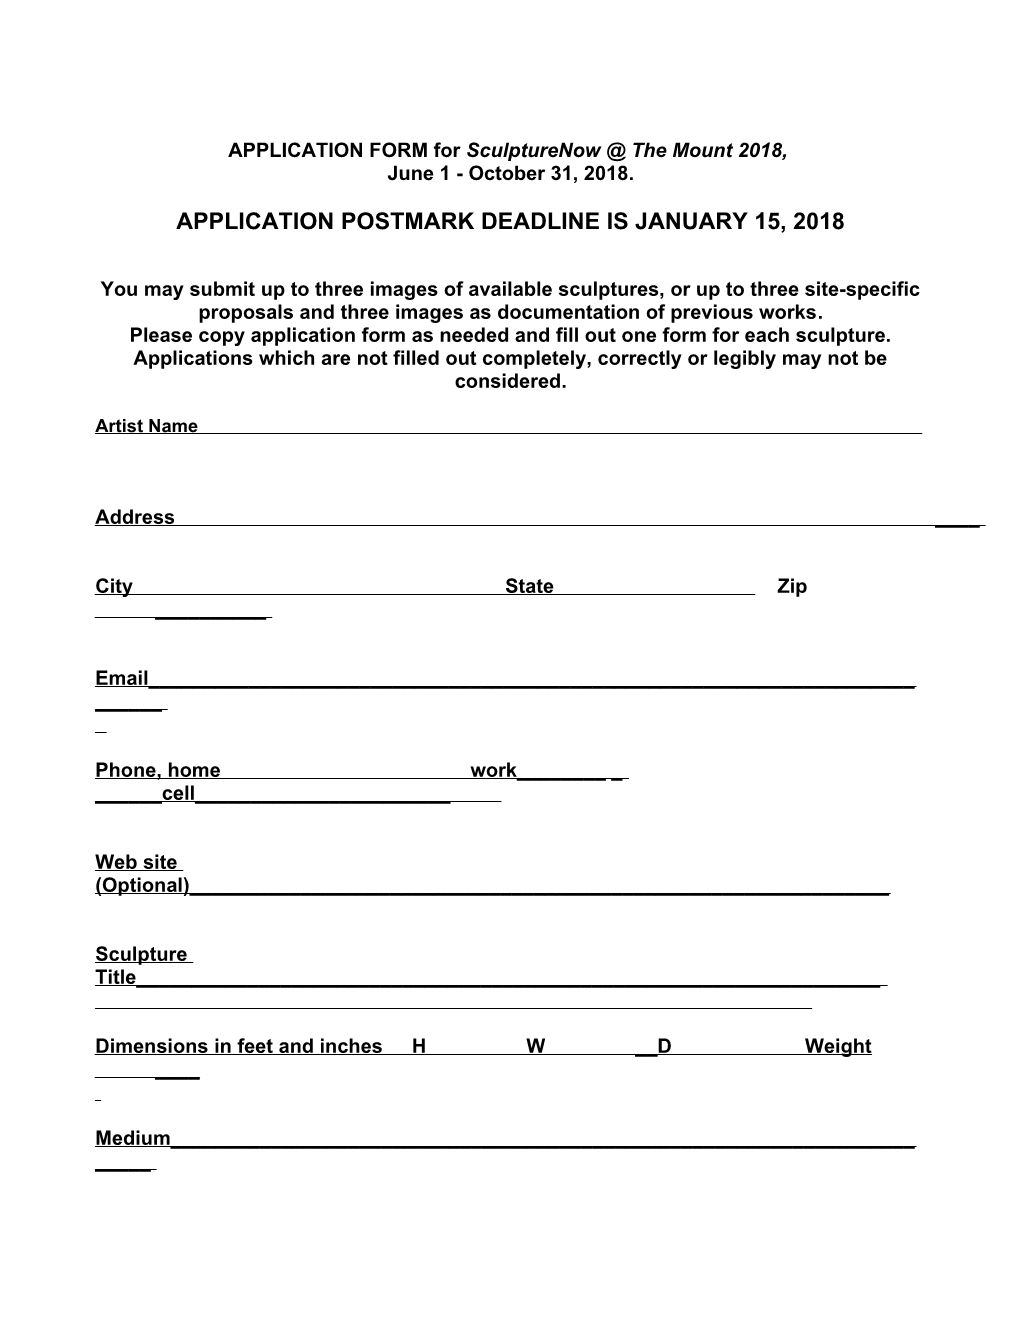 APPLICATION FORM for Sculpturenow the Mount 2018